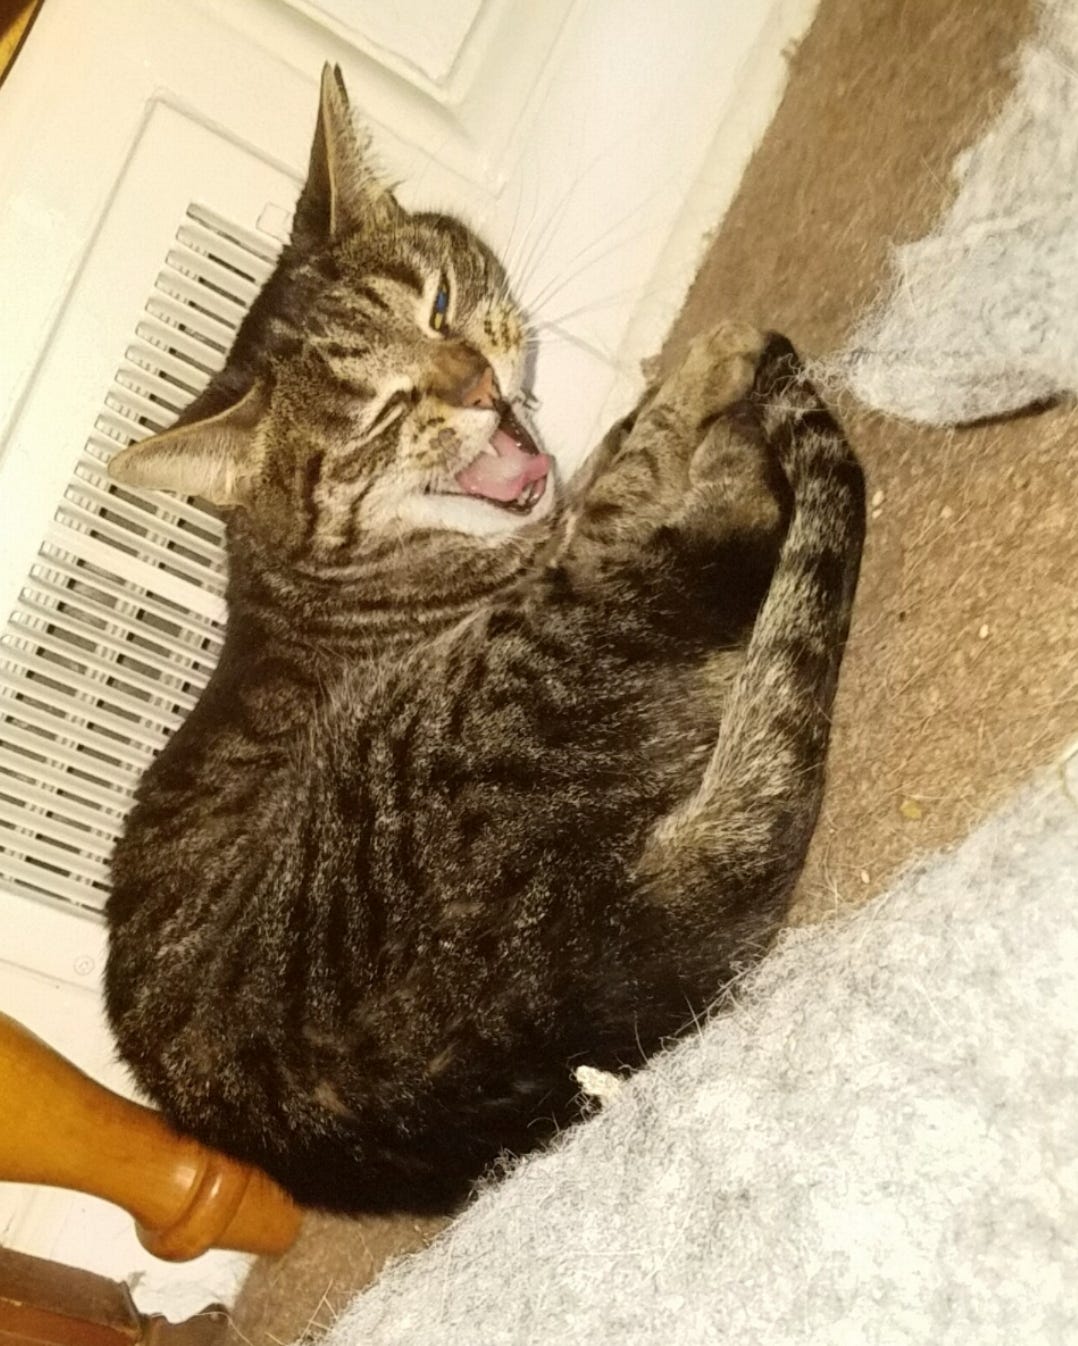 striped cat comically mid-yawn